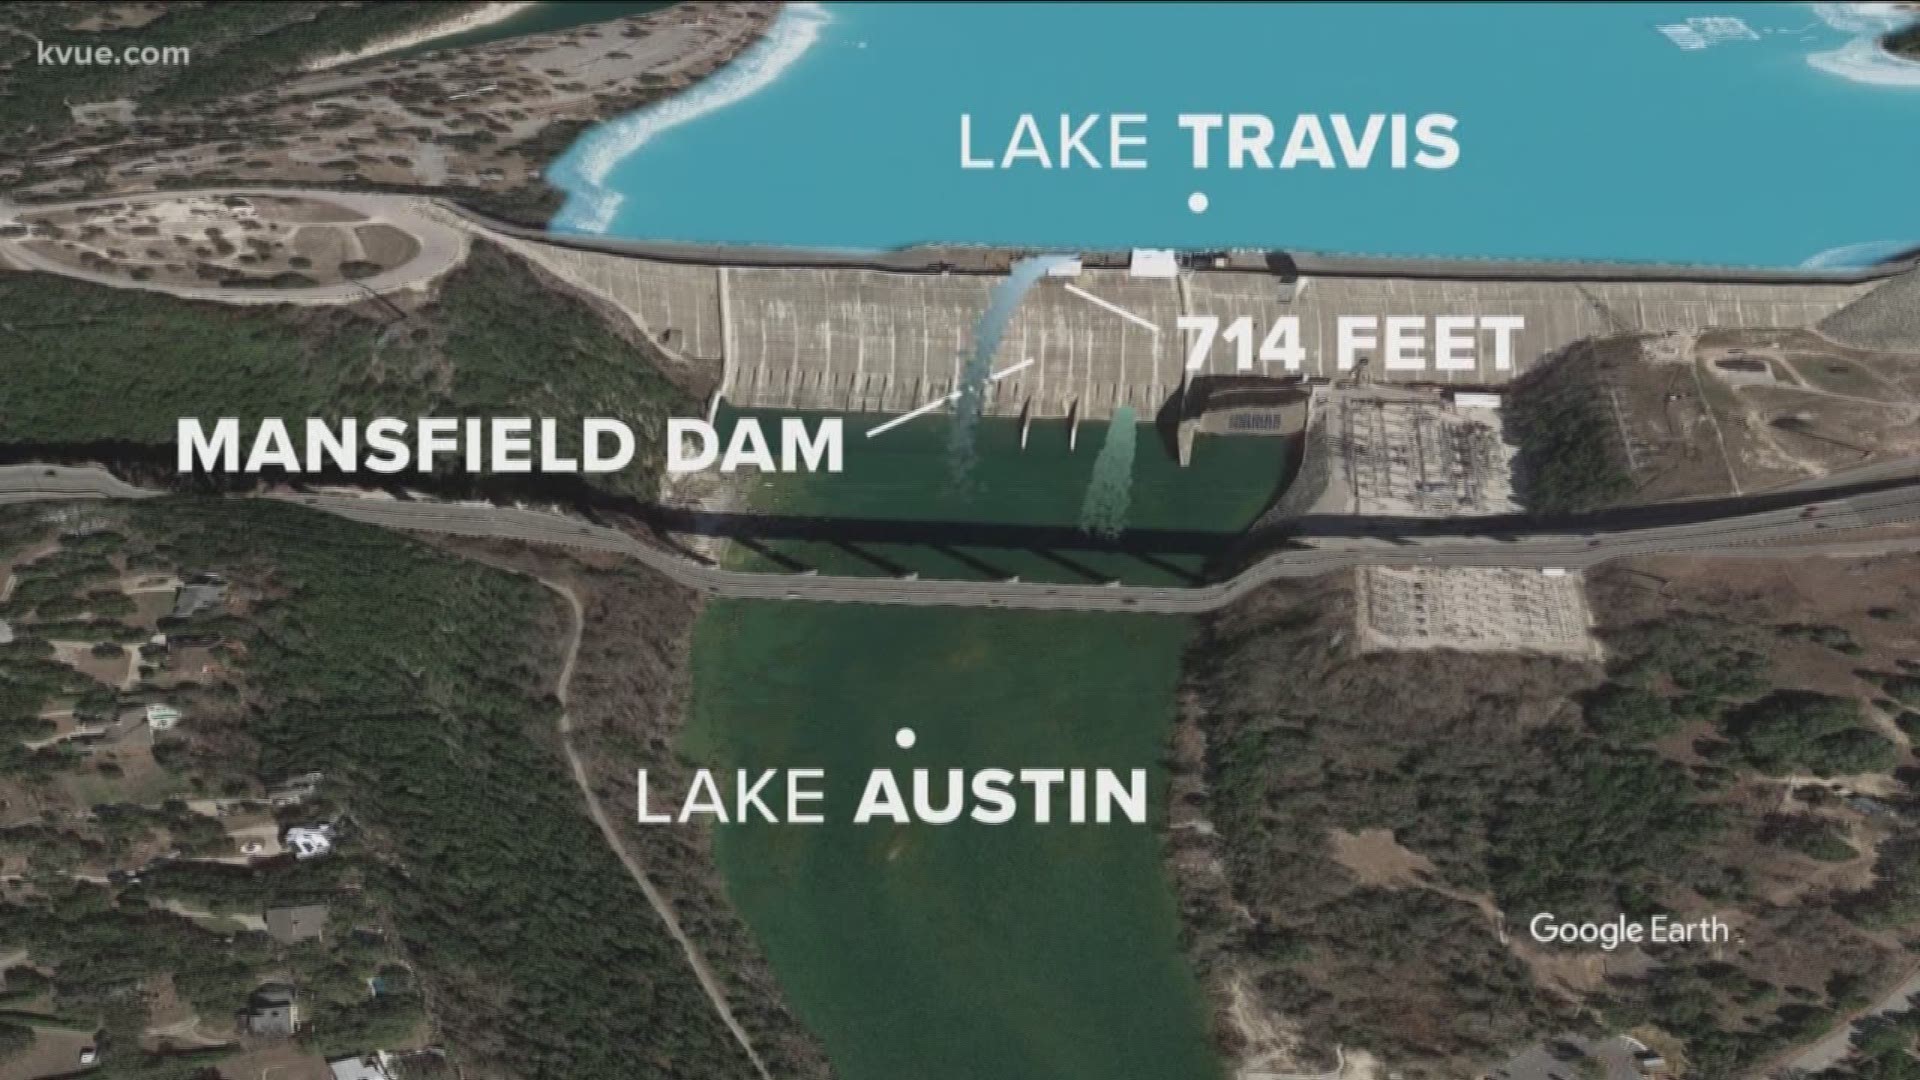 This water from Lake Travis continues to surge out of the four floodgates currently open at the Mansfield Dam.